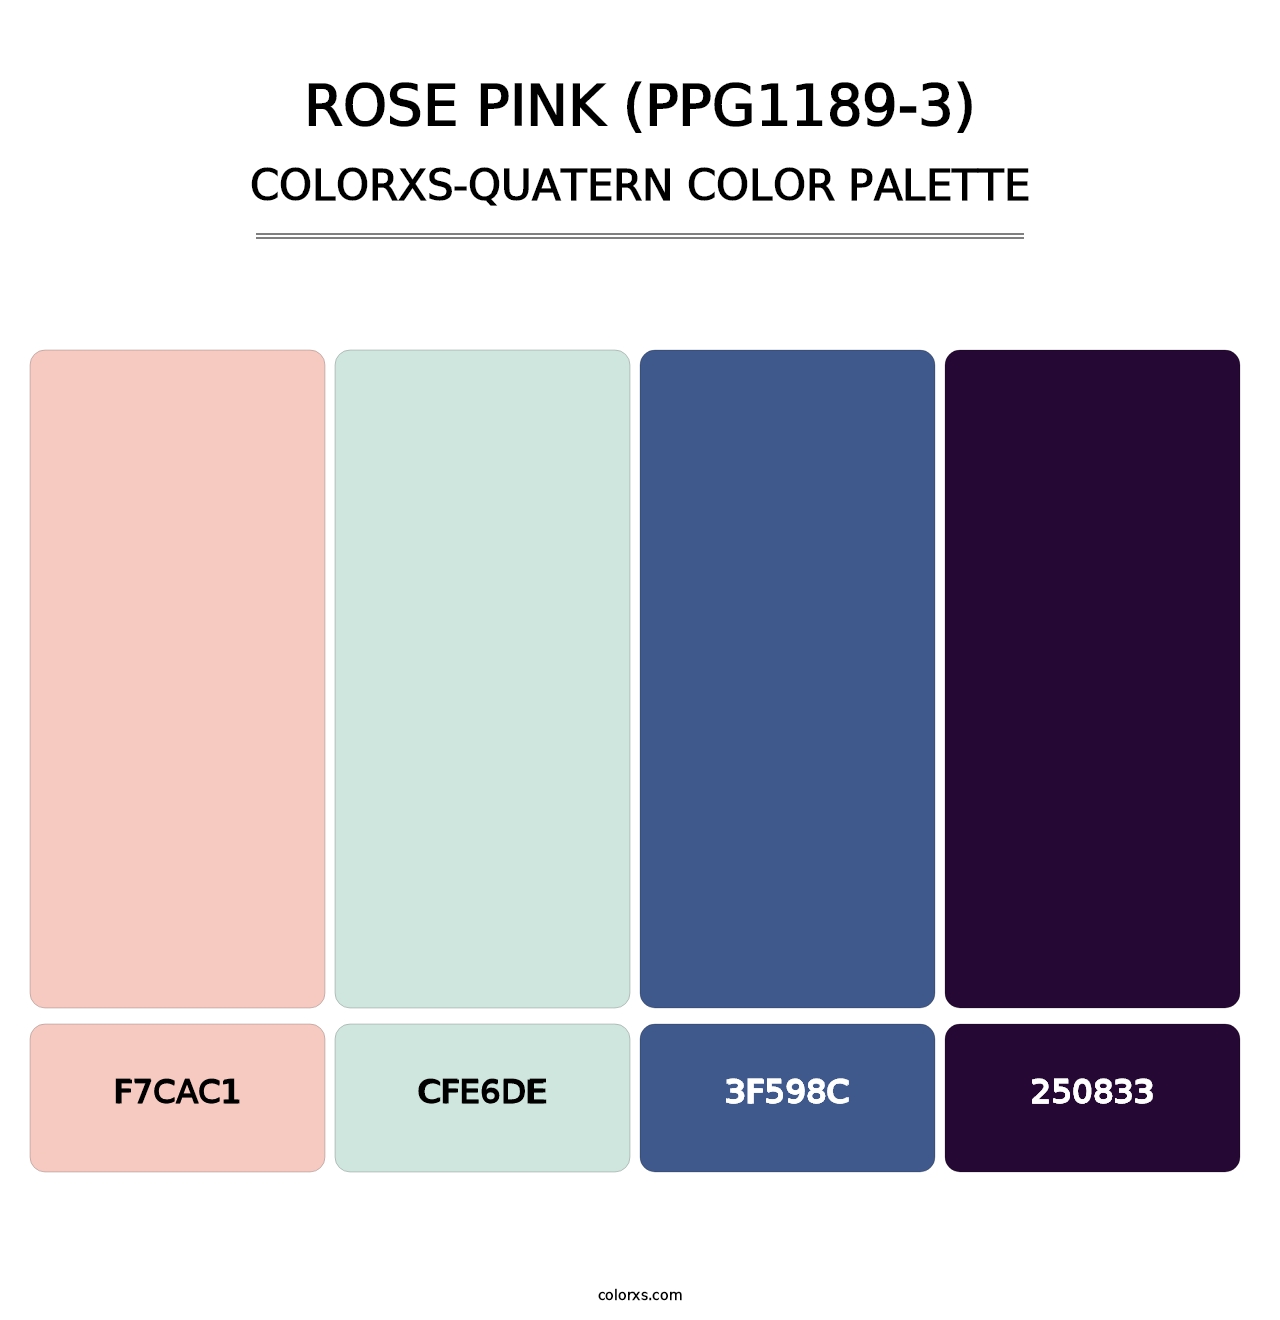 Rose Pink (PPG1189-3) - Colorxs Quatern Palette